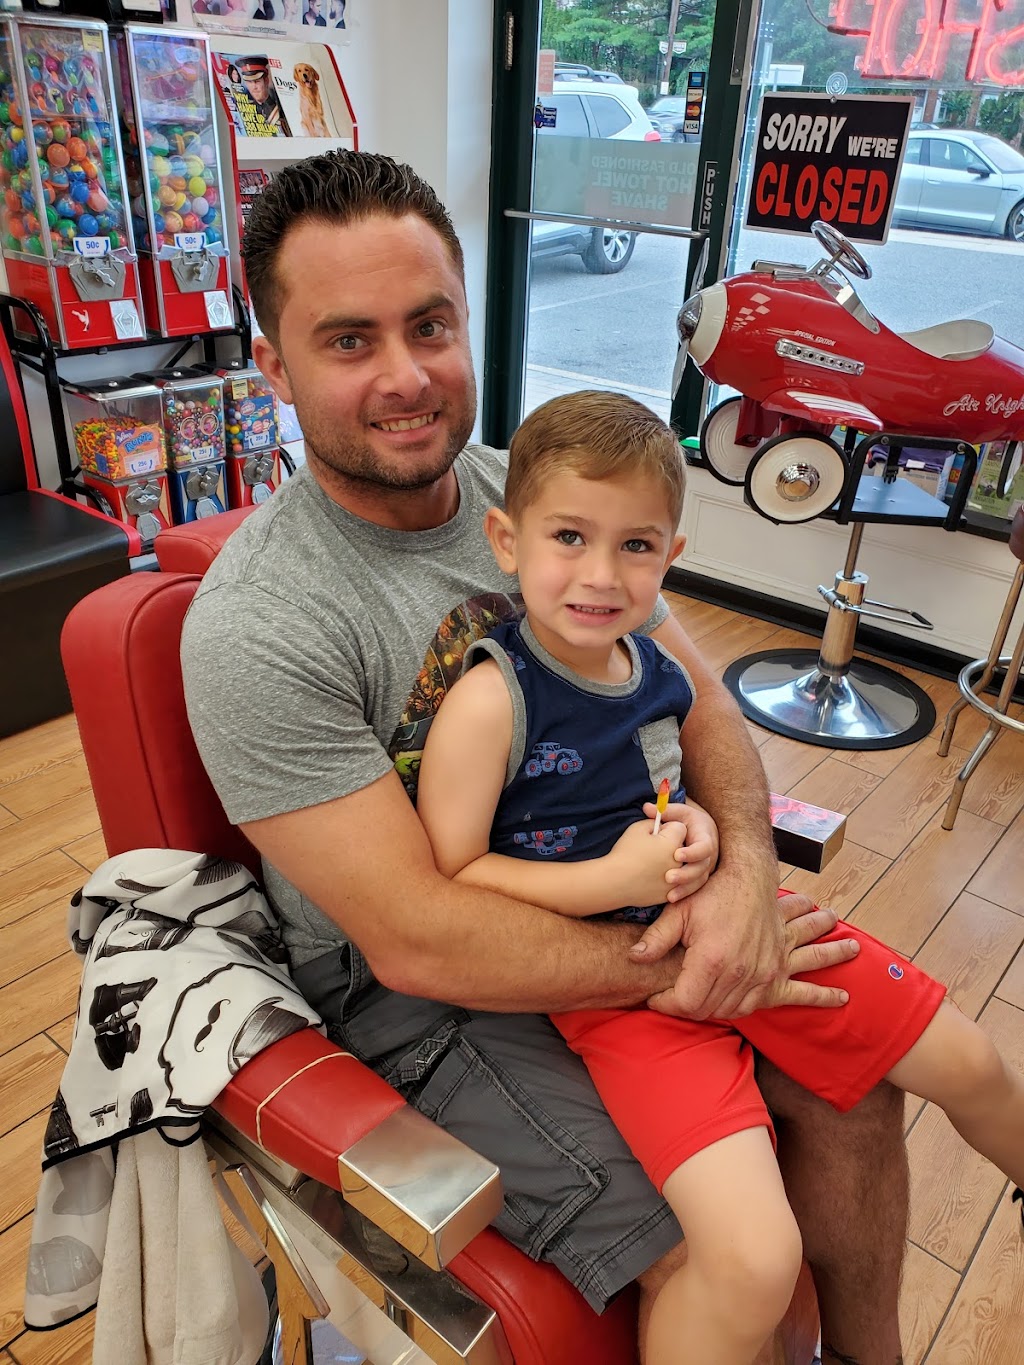 Richies Barber Shop | 1006 Oyster Bay Rd, East Norwich, NY 11732 | Phone: (516) 922-2460